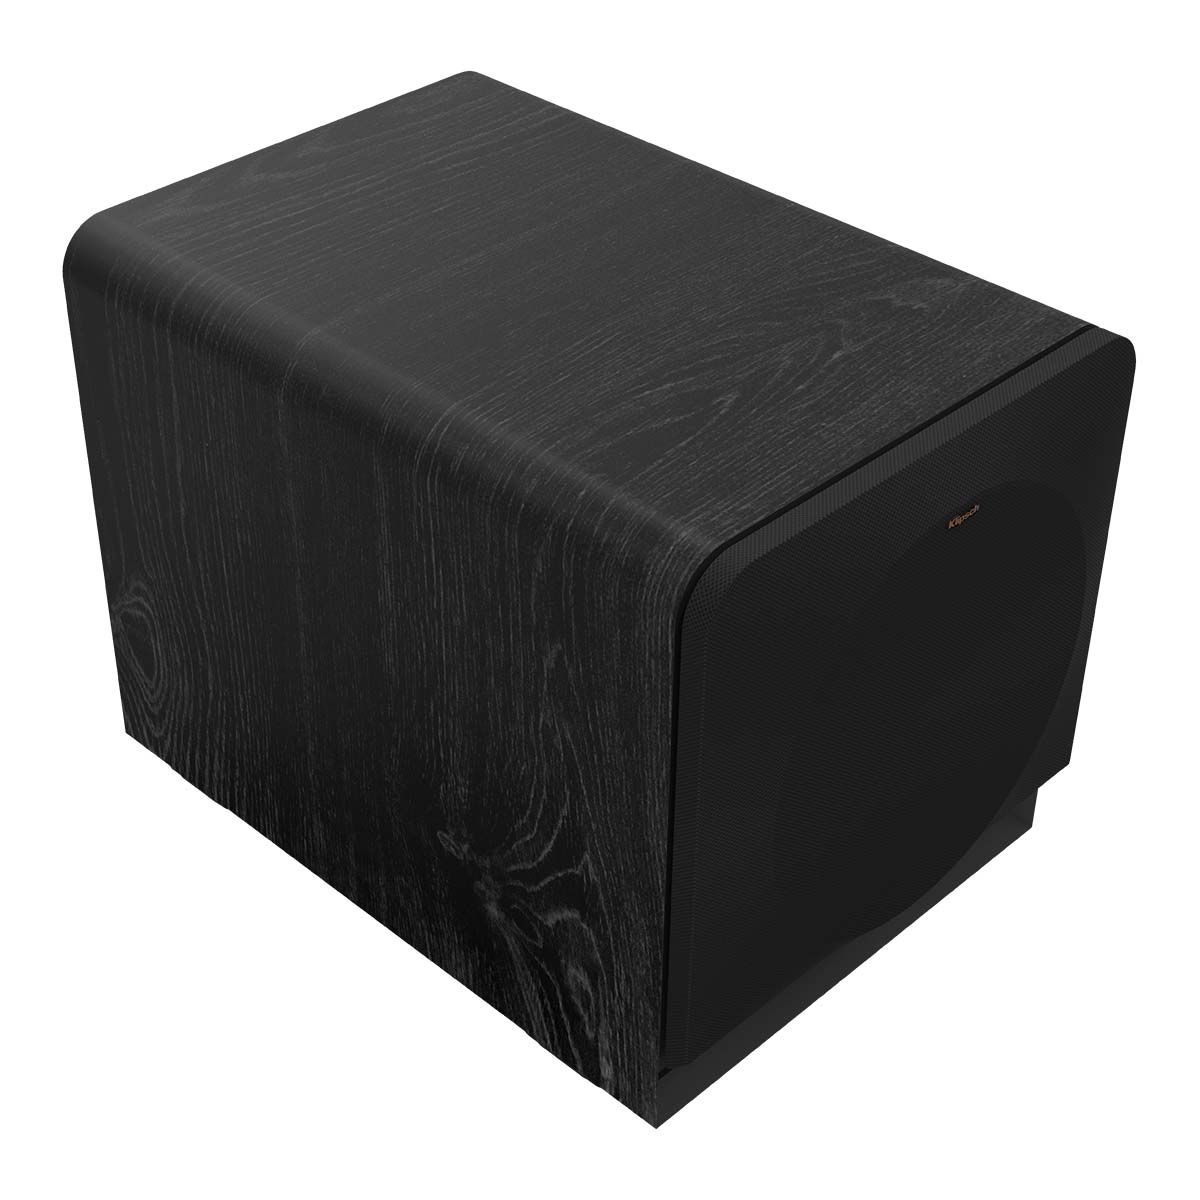 Klipsch RP-1200SW 12" Powered Subwoofer - Ebony - angled top left view with grille